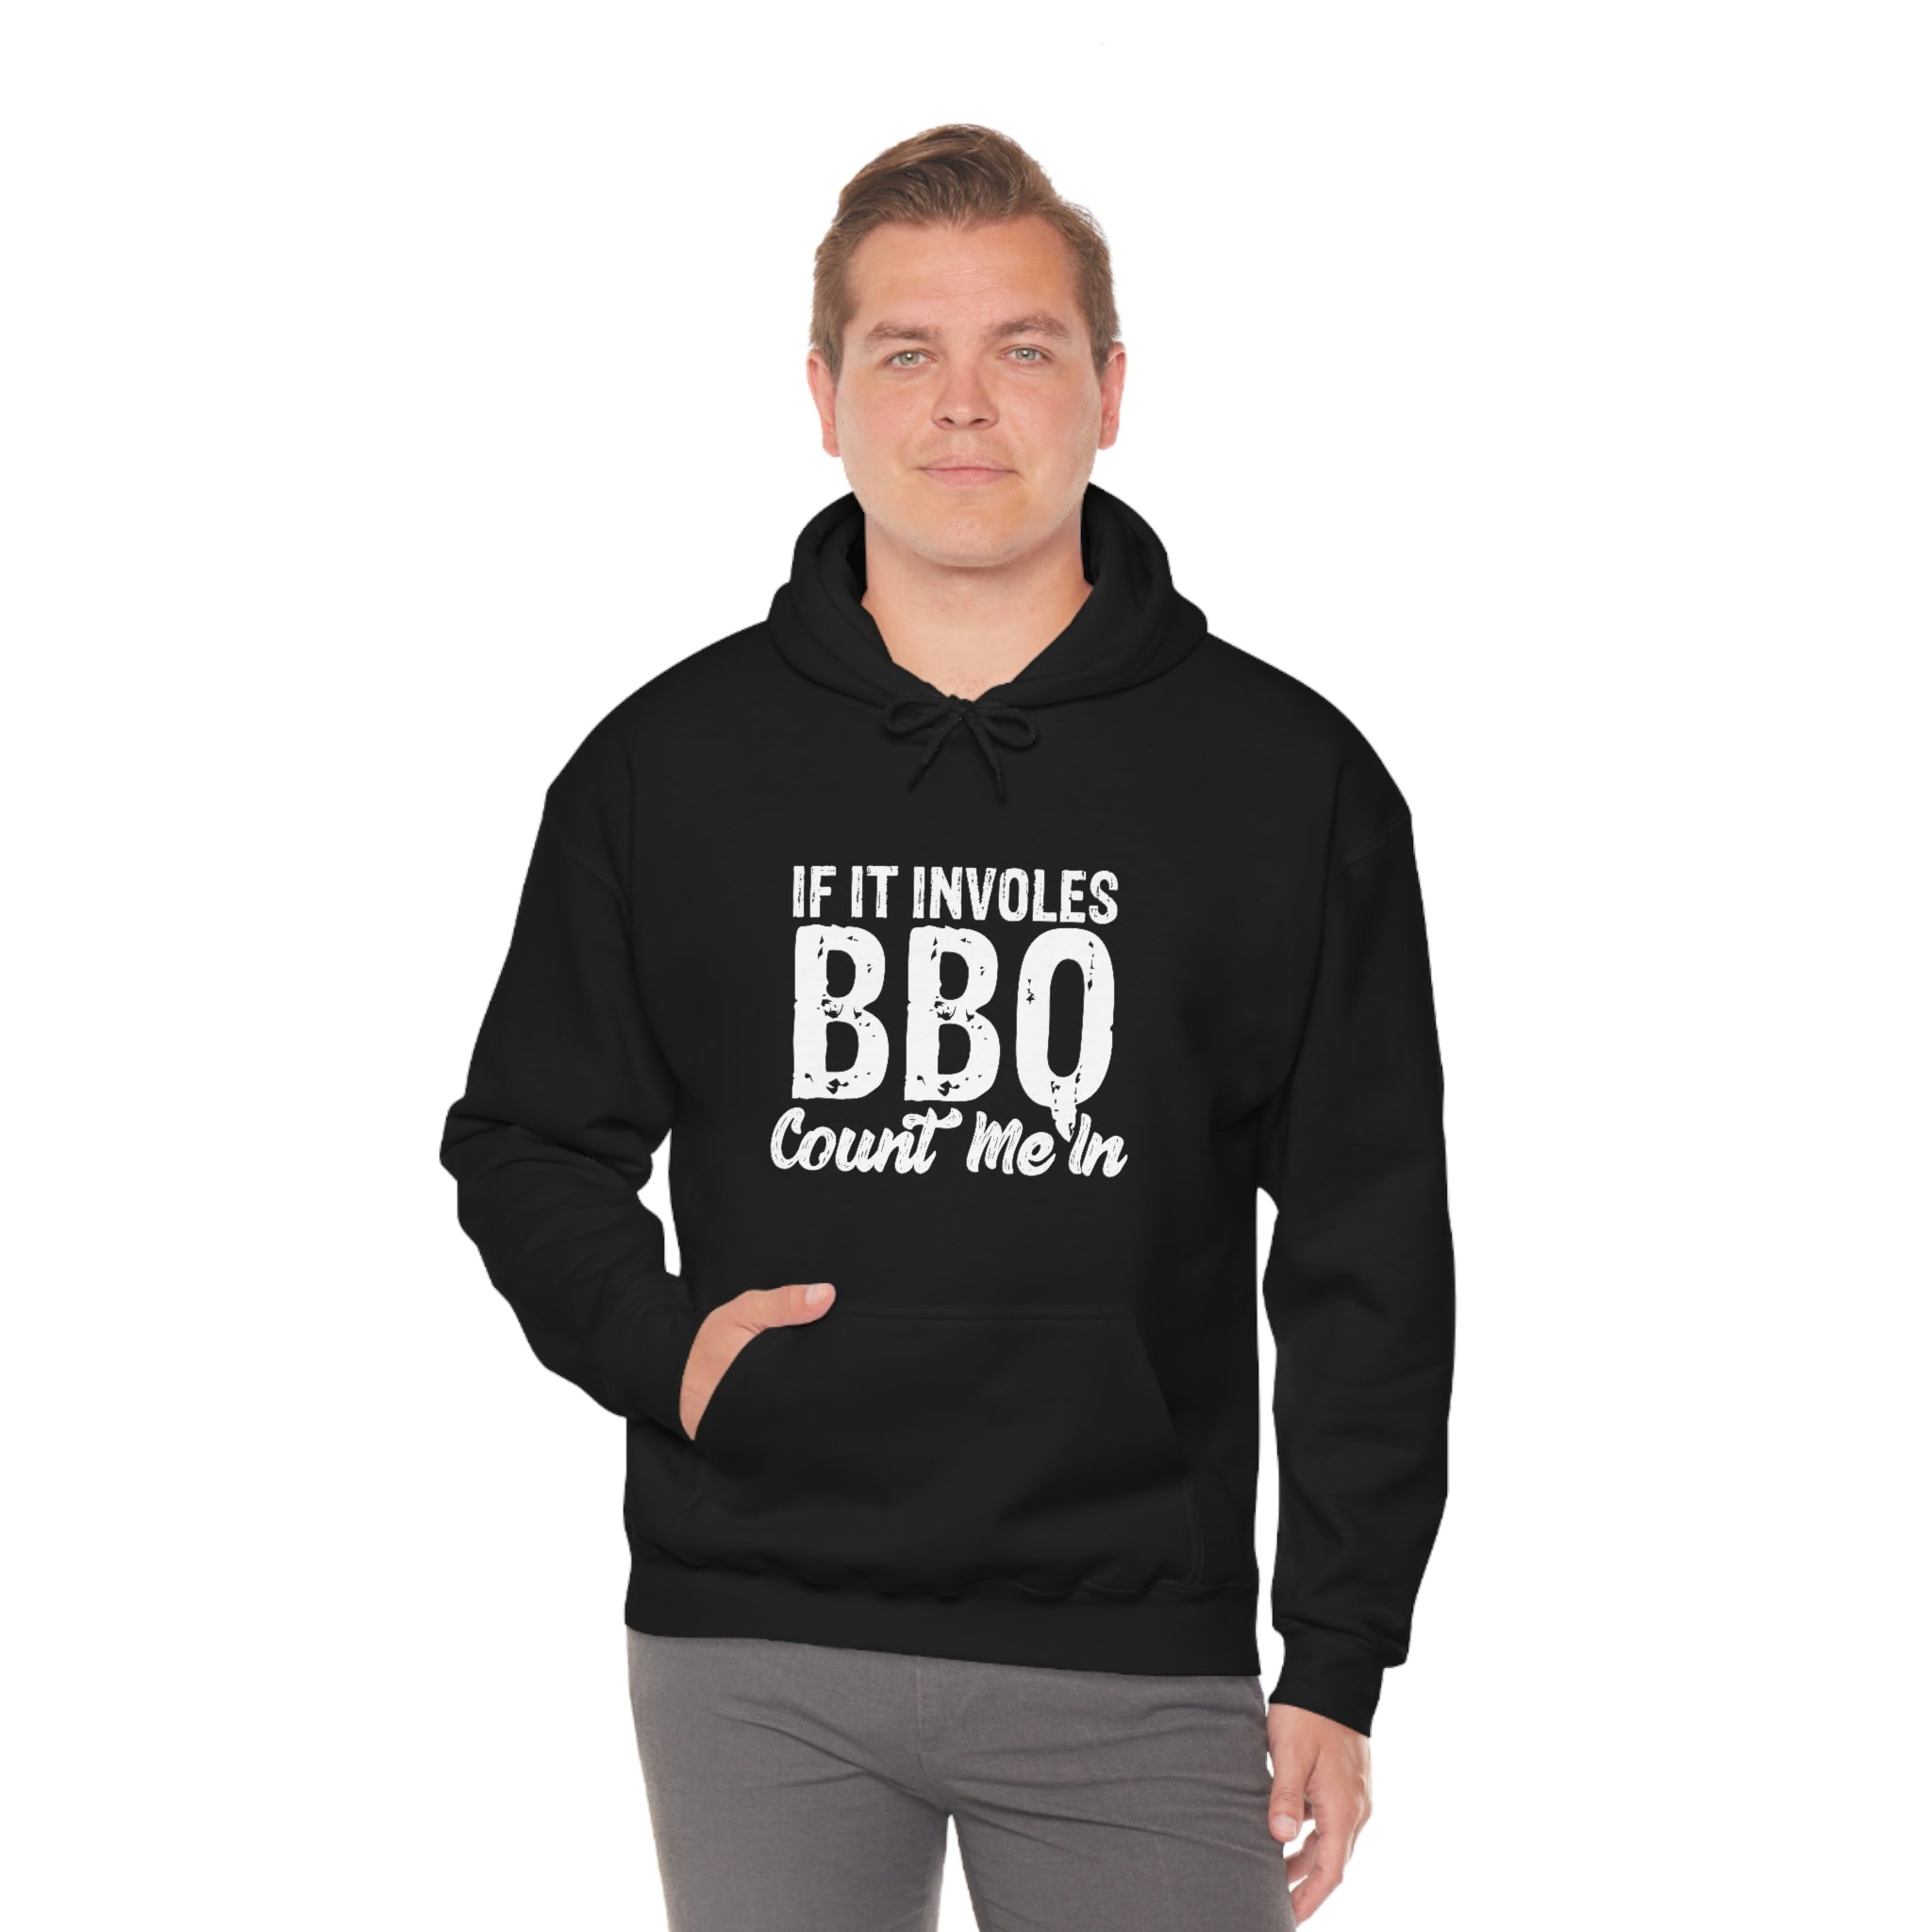 If It involves BBQ Count Me In hooded sweatshirt